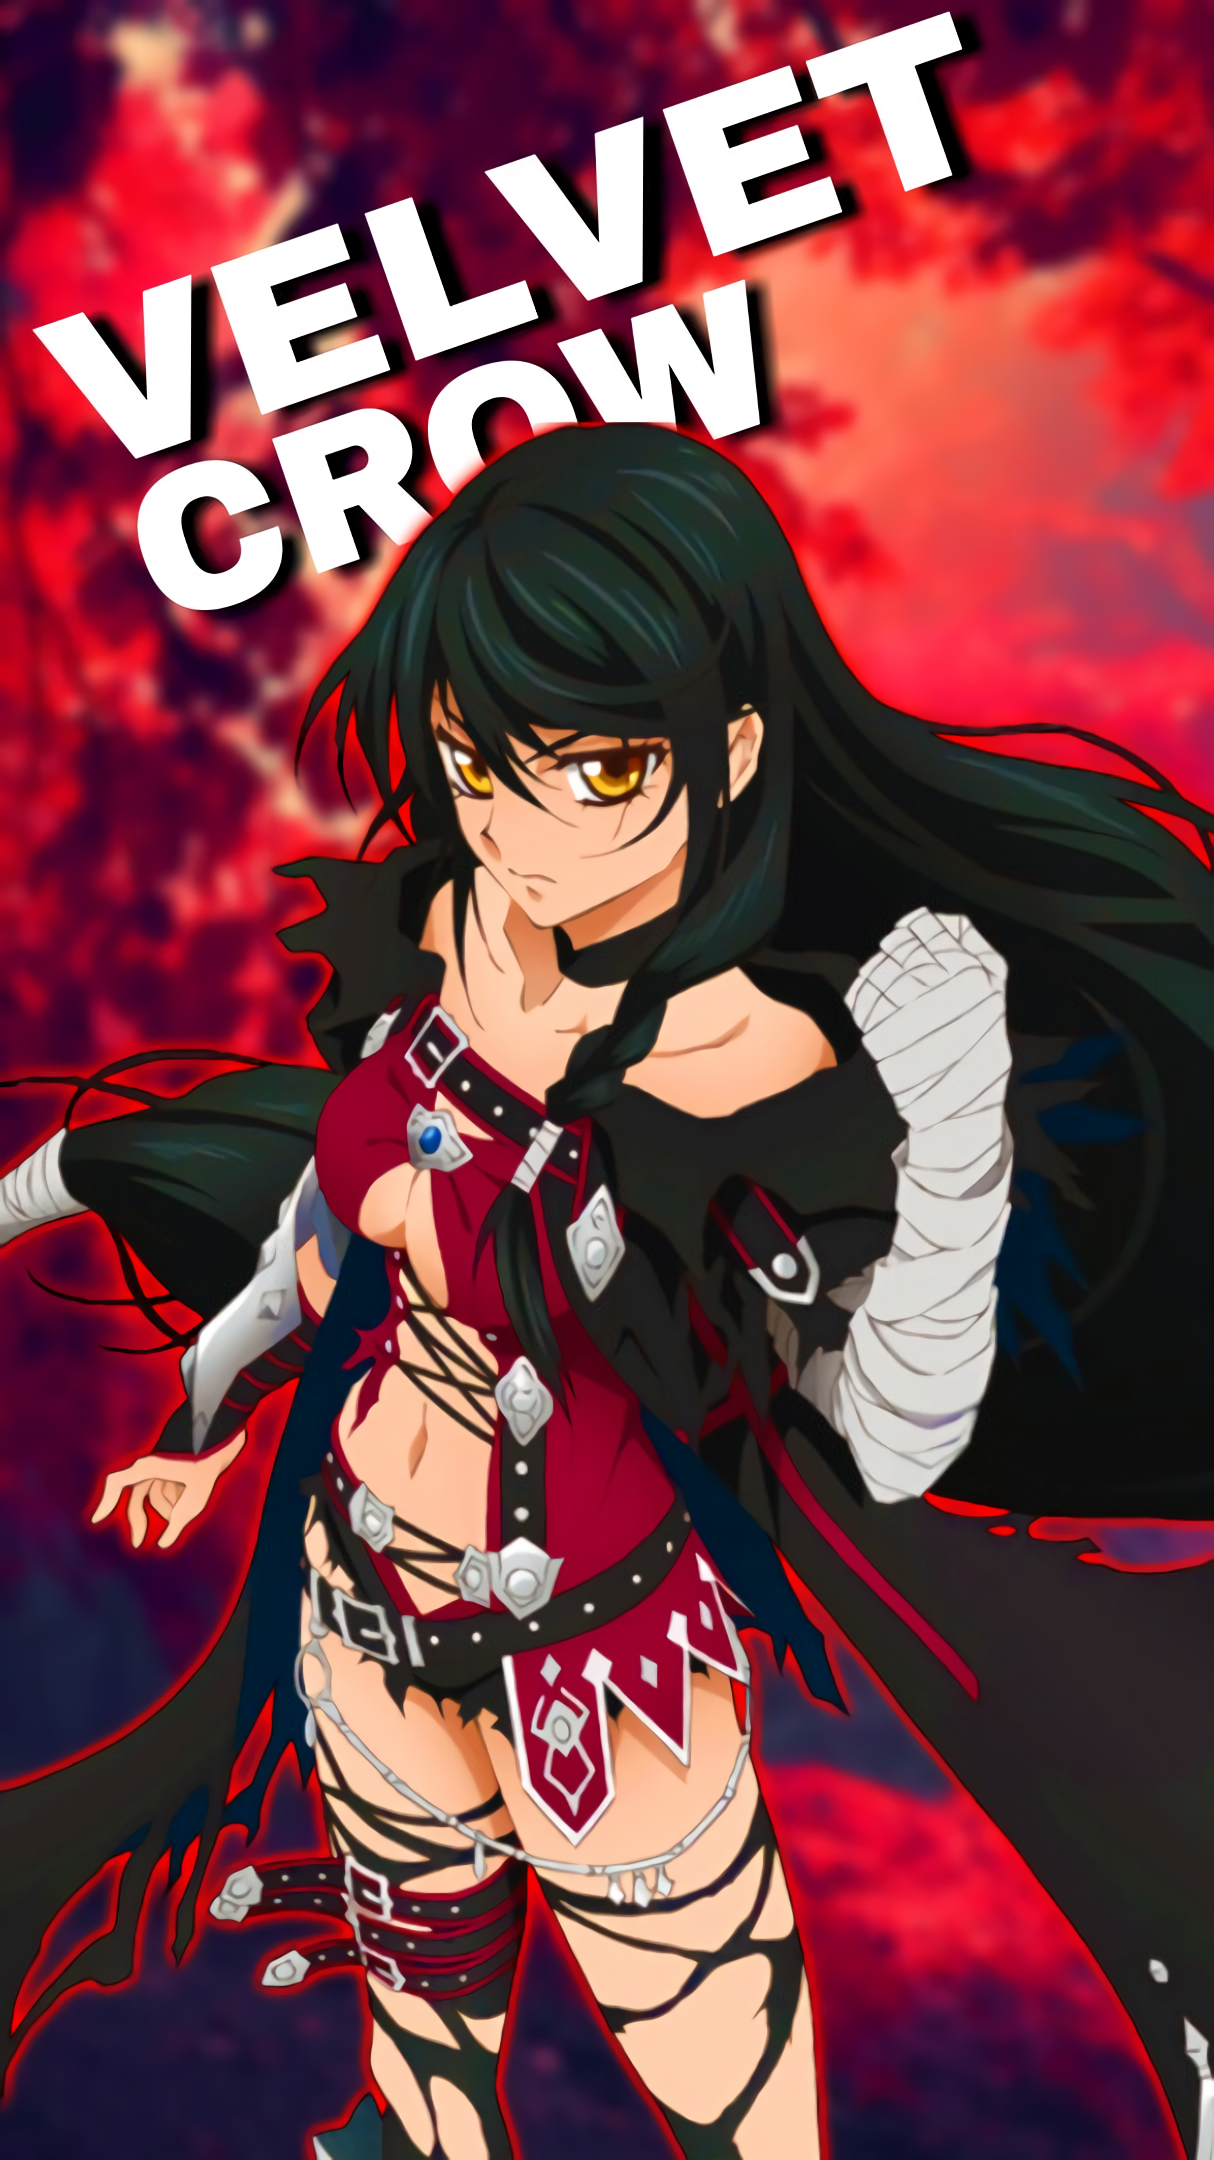 Anime 1214x2160 anime Velvet Crowe demon girls Tales of Berseria anime girls picture-in-picture